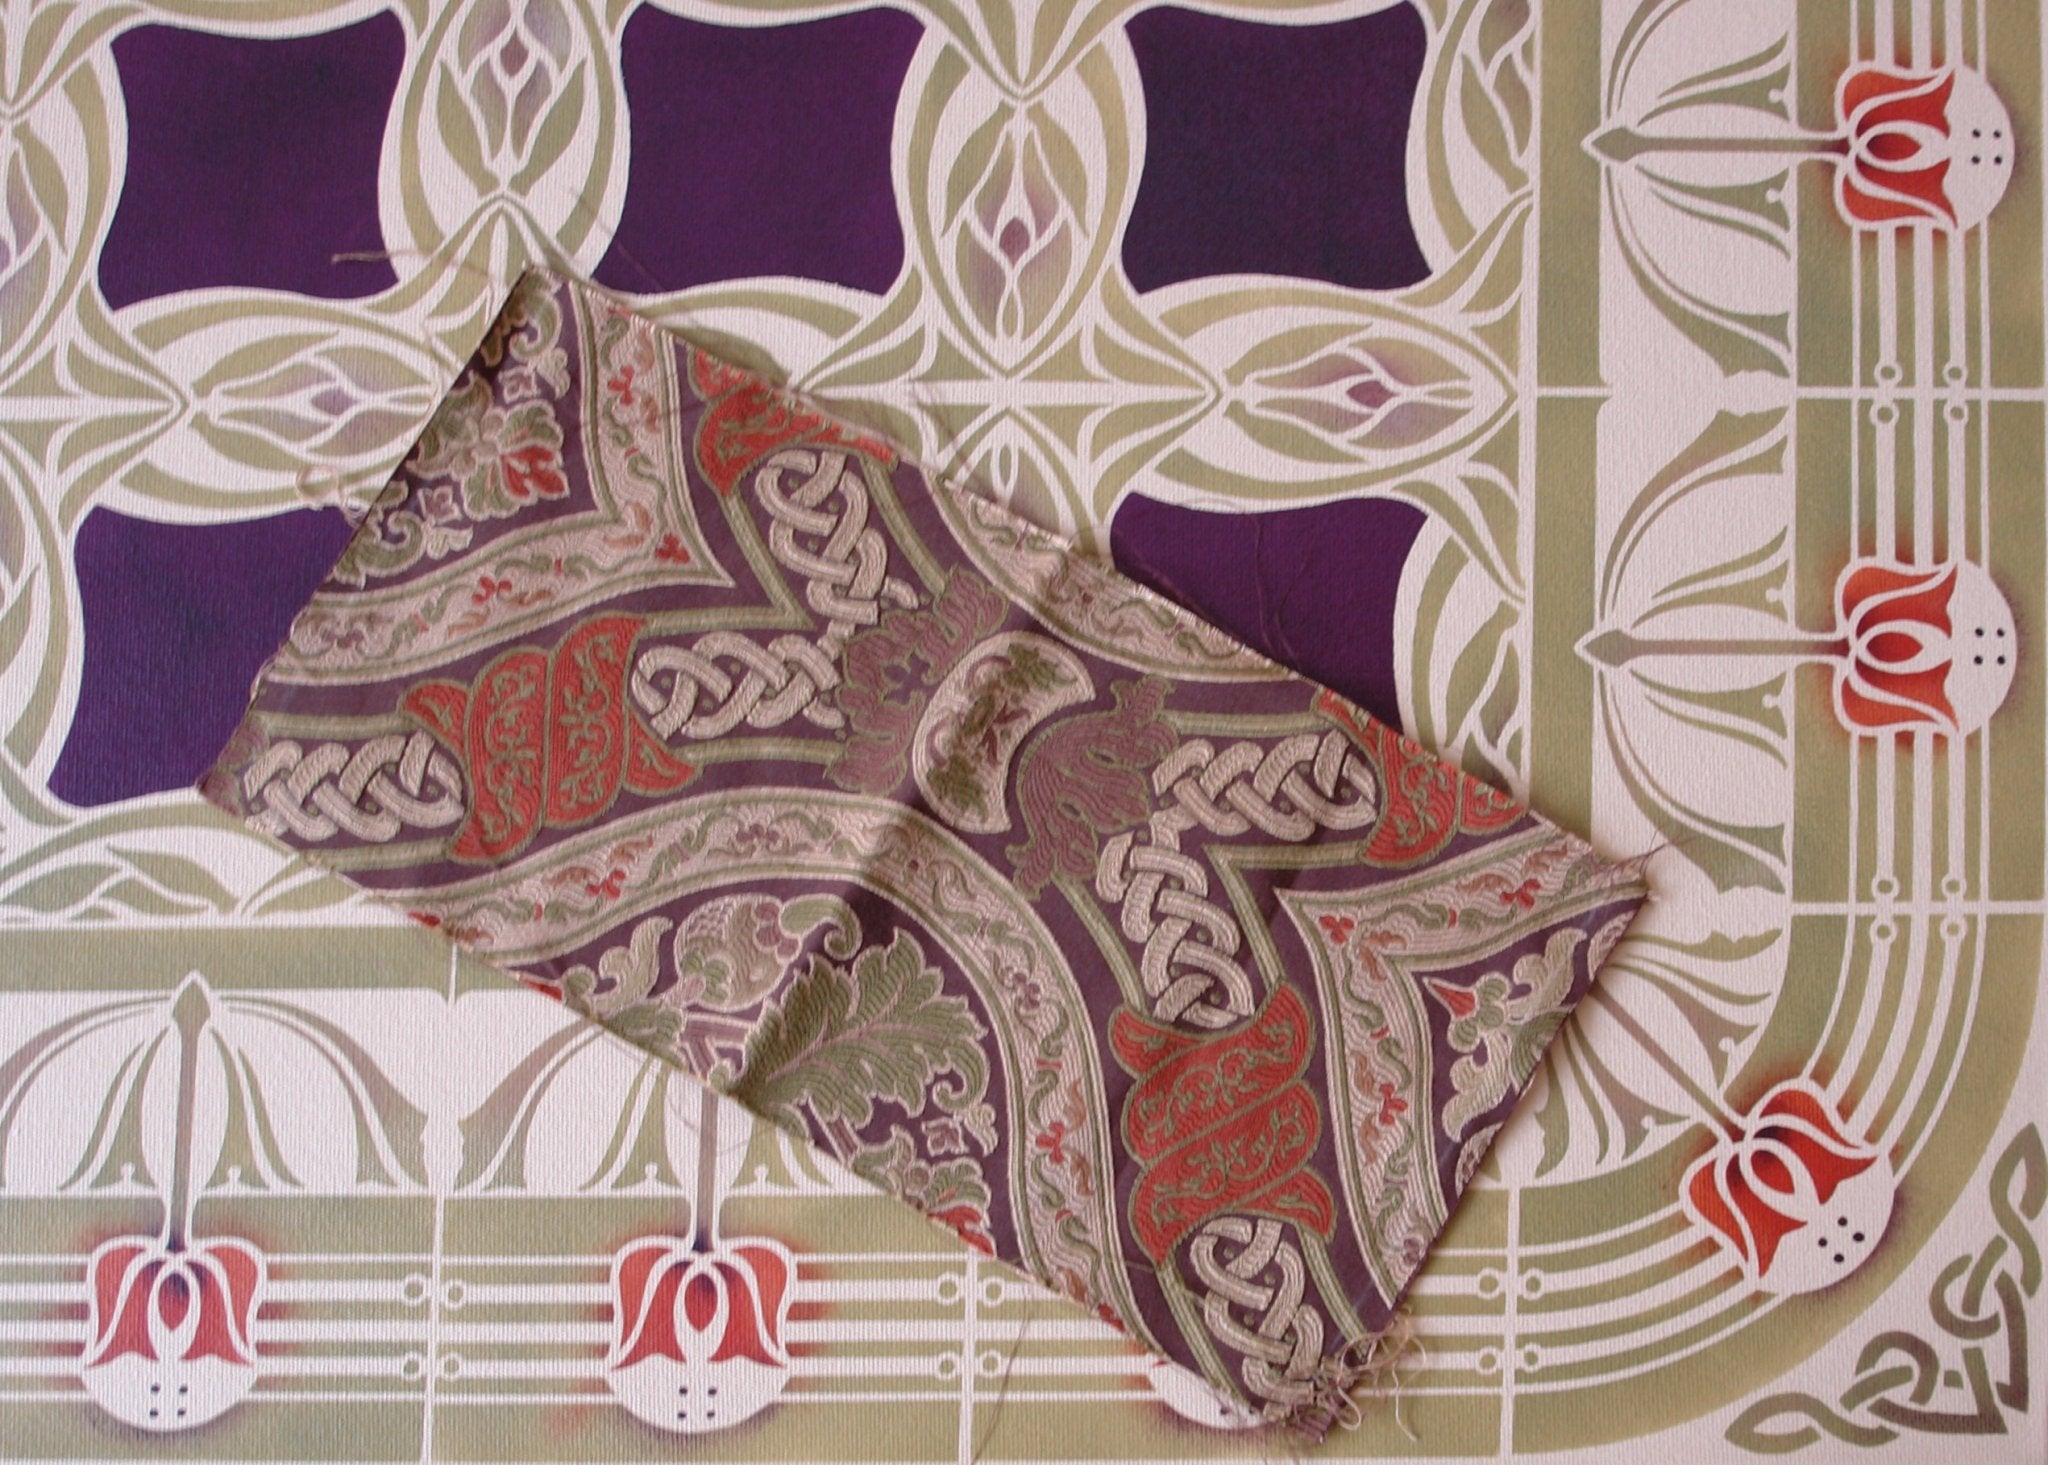 A photo of the floorcloth with the upholstery fabric that inspired the palette and the corner motifs for Wunderlich Floorcloth #5.